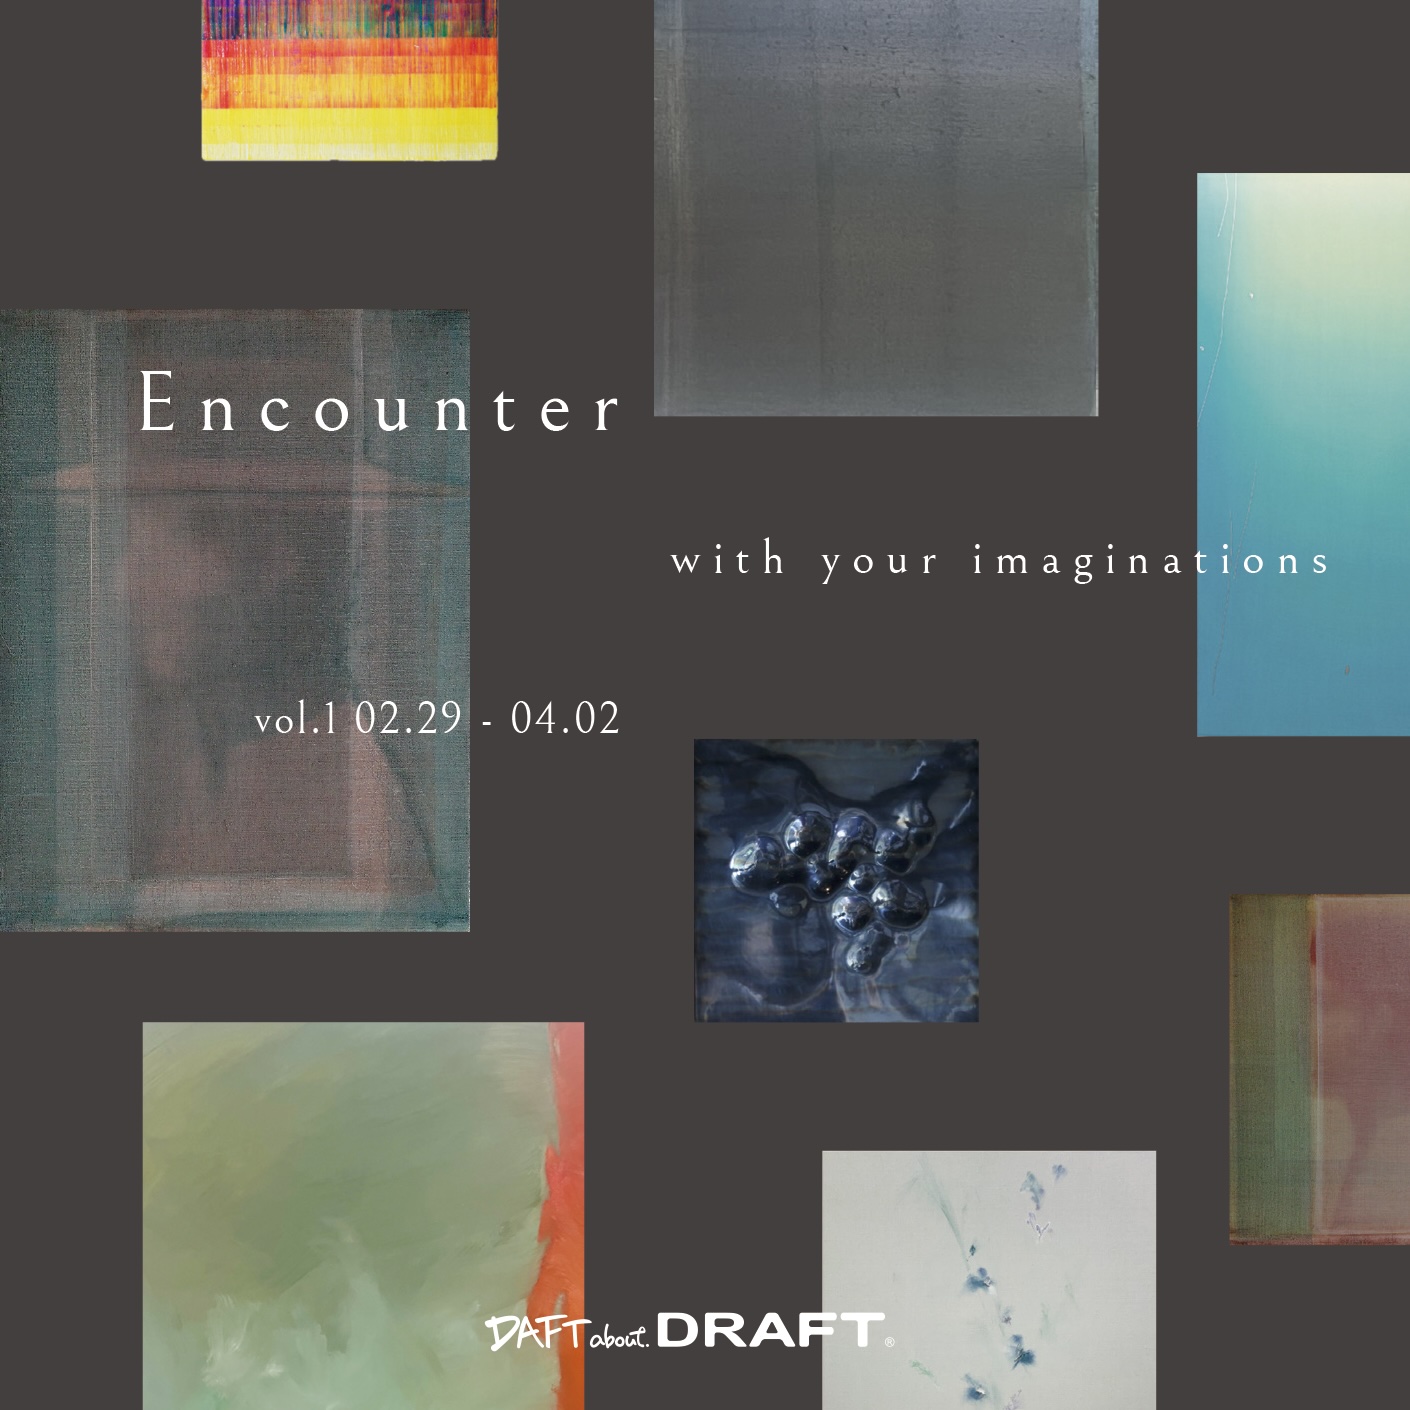 【News】　展覧会「Encounter with your imaginations」DAFT about DRAFT FLAGSHIP STOREのご案内 / Exhibition “Encounter with your imaginations” DAFT about DRAFT FLAGSHIP STORE